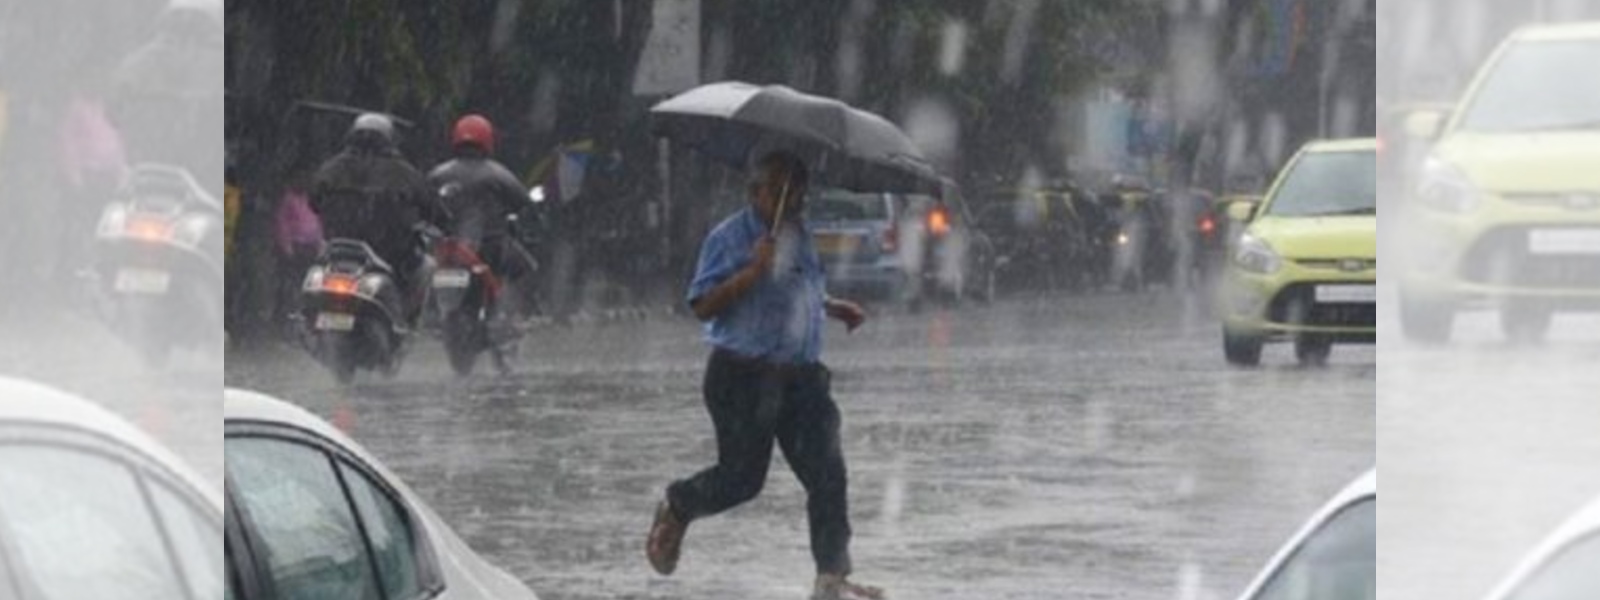 HEAVY RAINS EXCEEDING 100 MM LIKELY